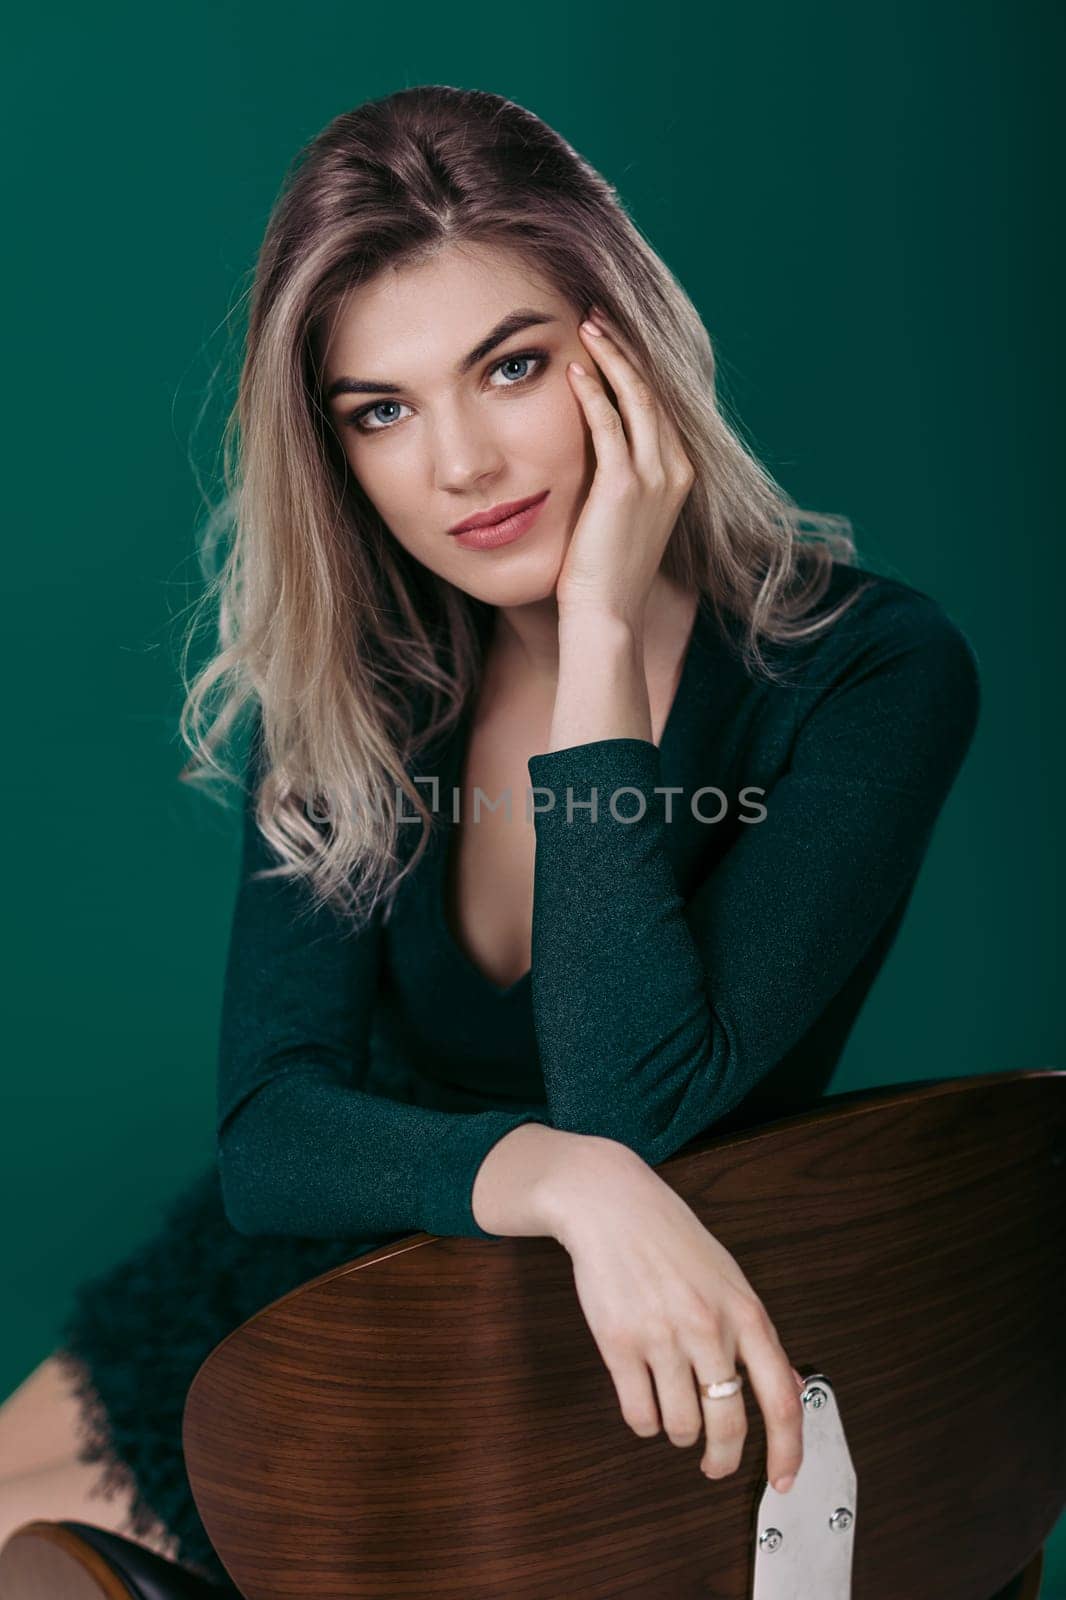 Sensual beautiful blonde woman in green dress sitting on chair and looking at camera against green background